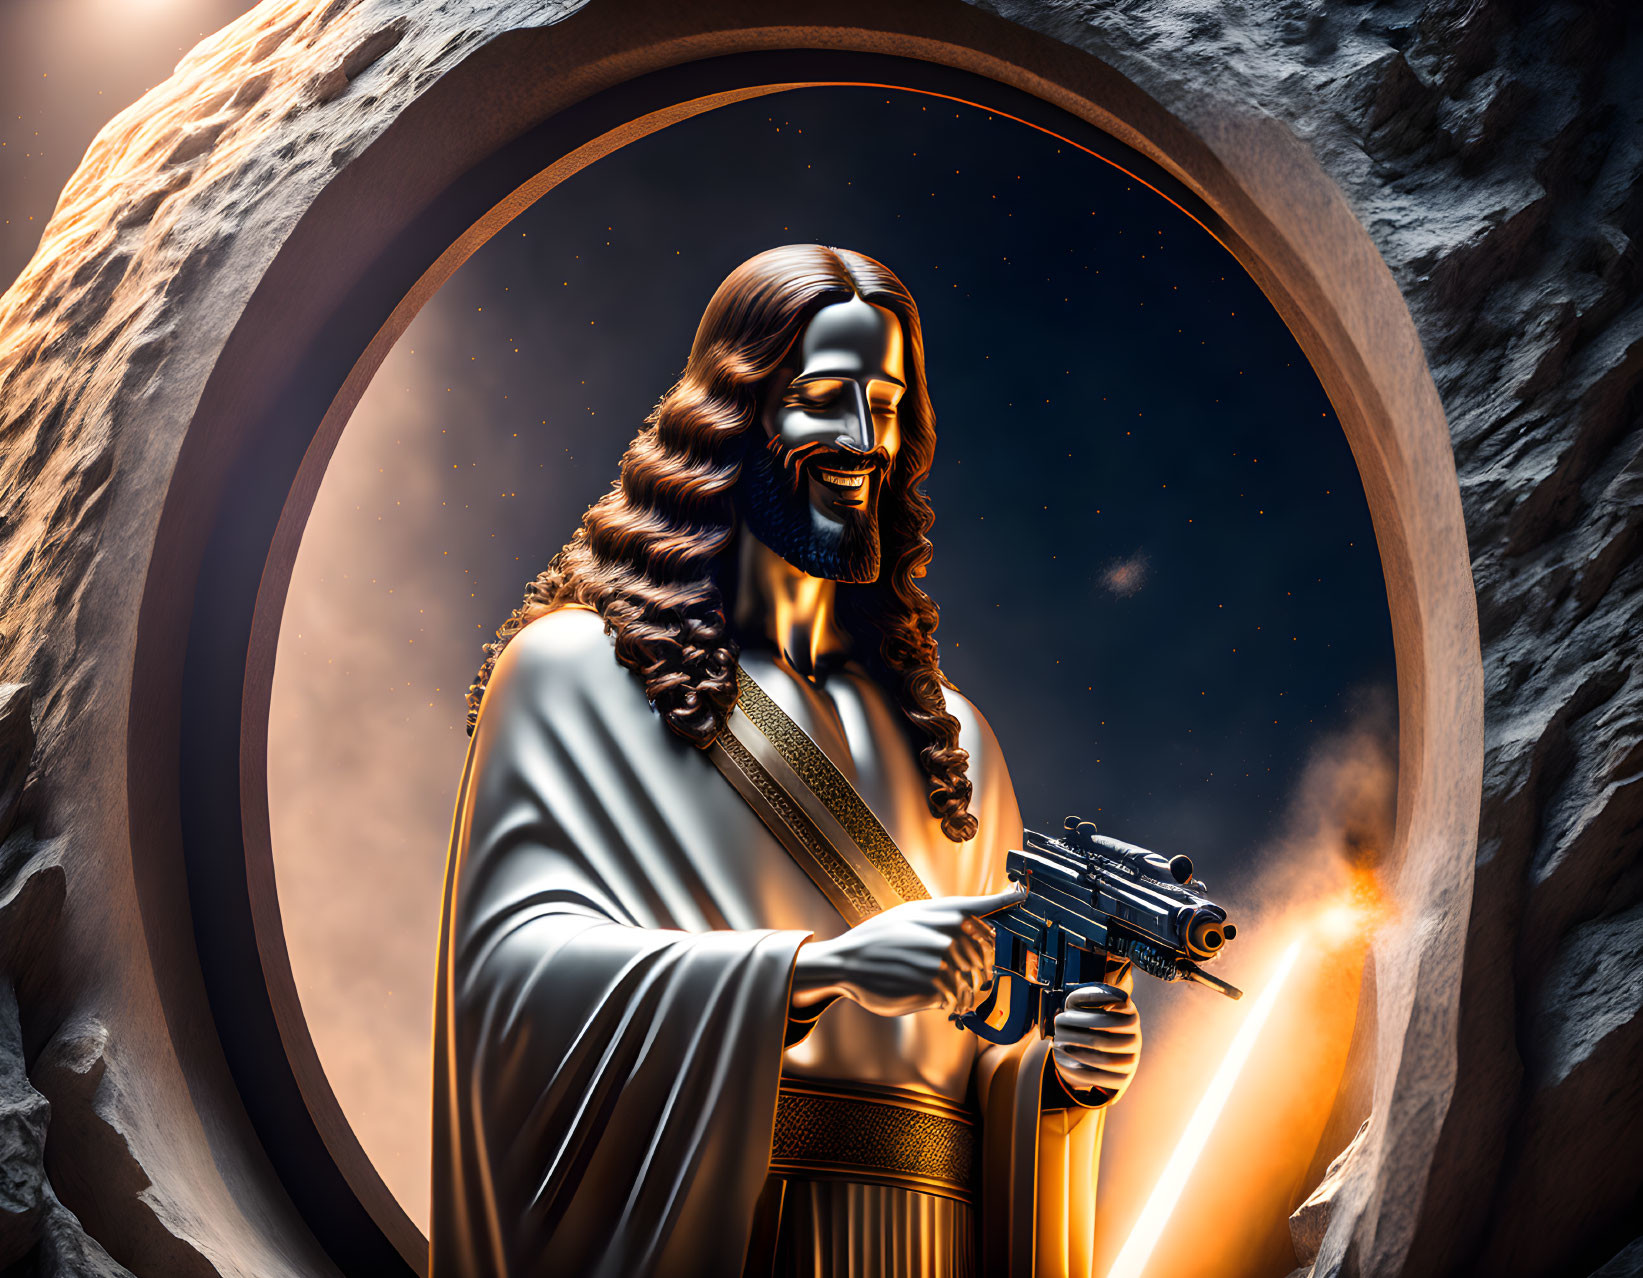 Religious figure holding a pistol in celestial background